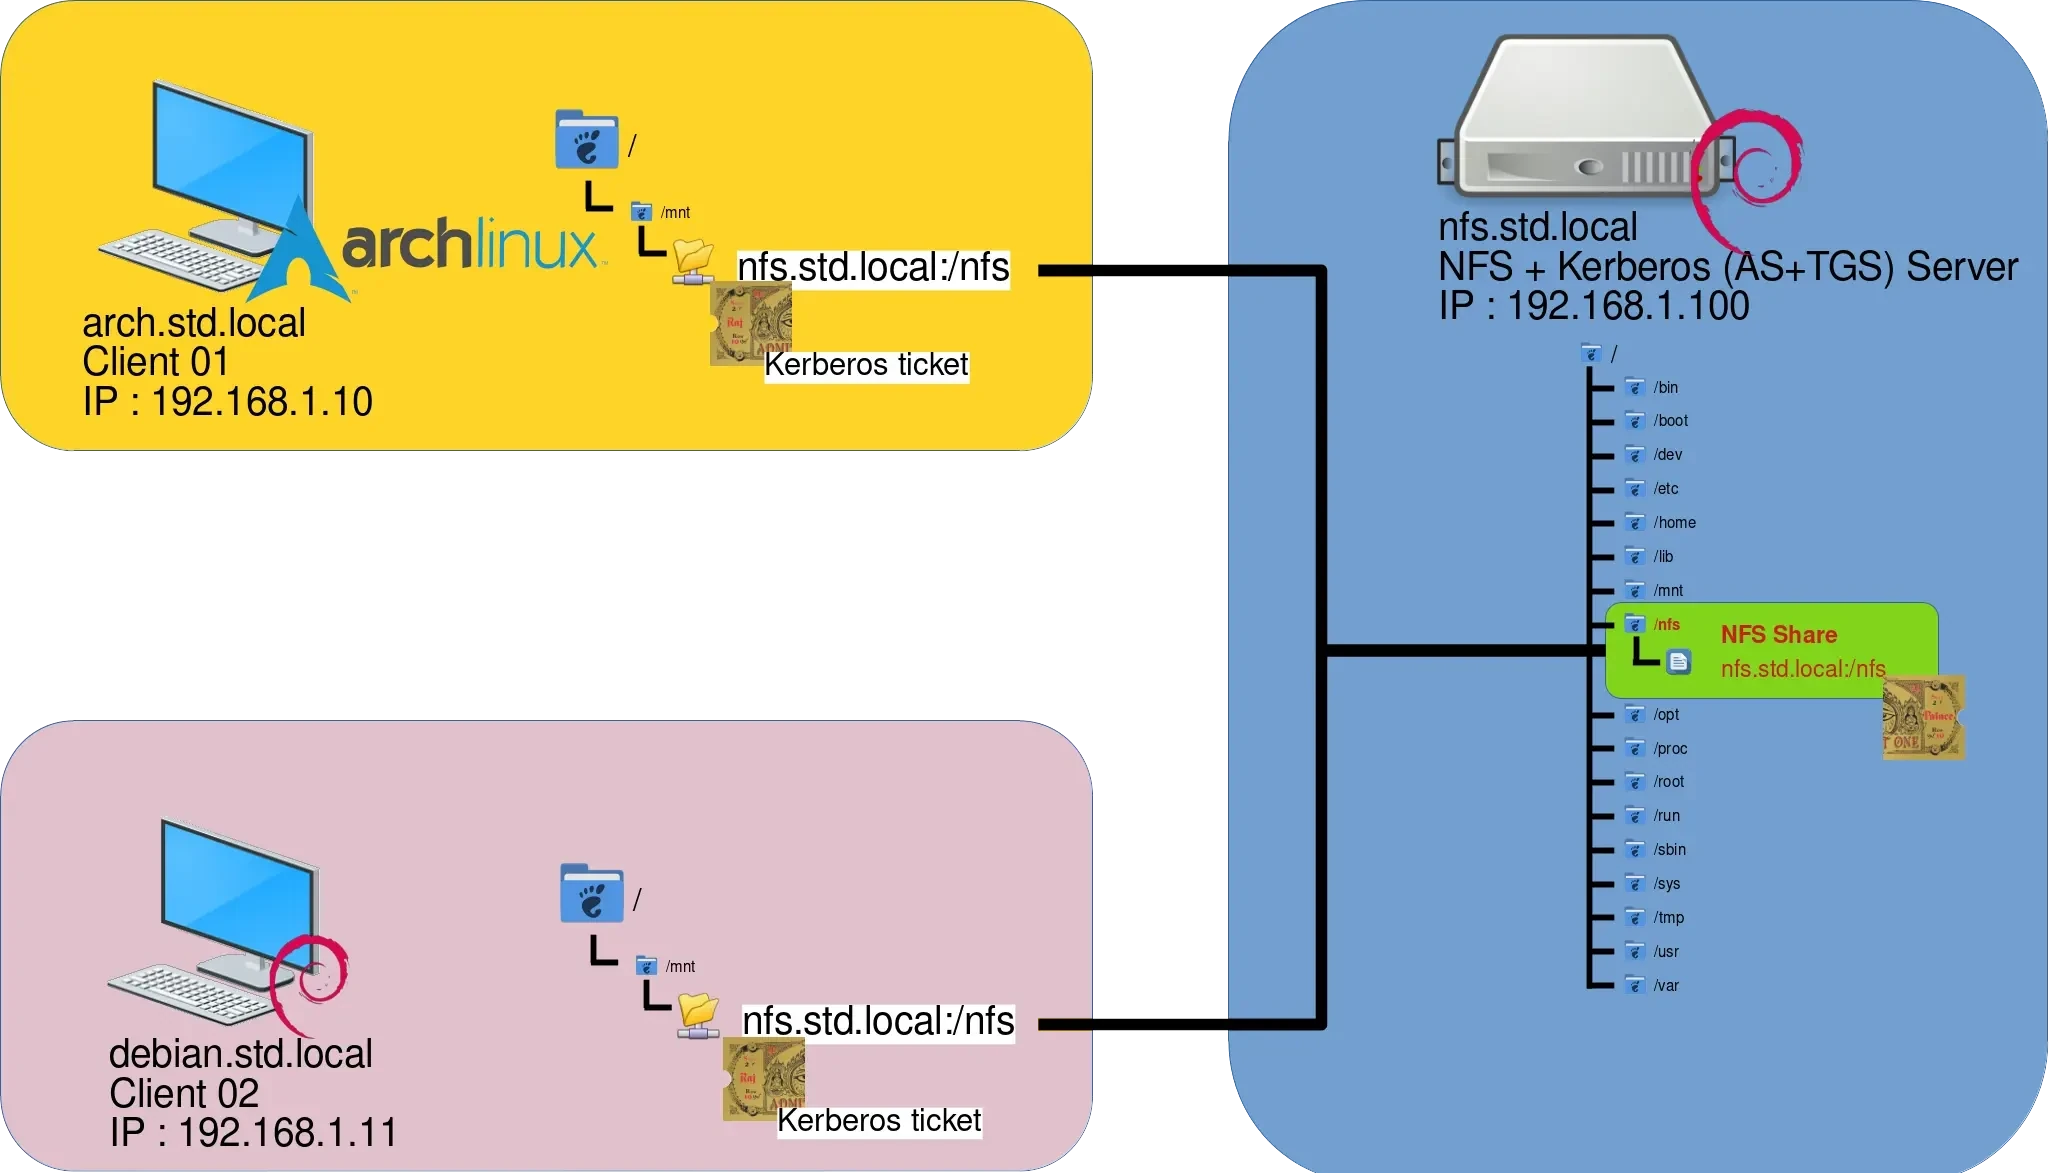 NFS and kerberos architecture with one server and two hosts.